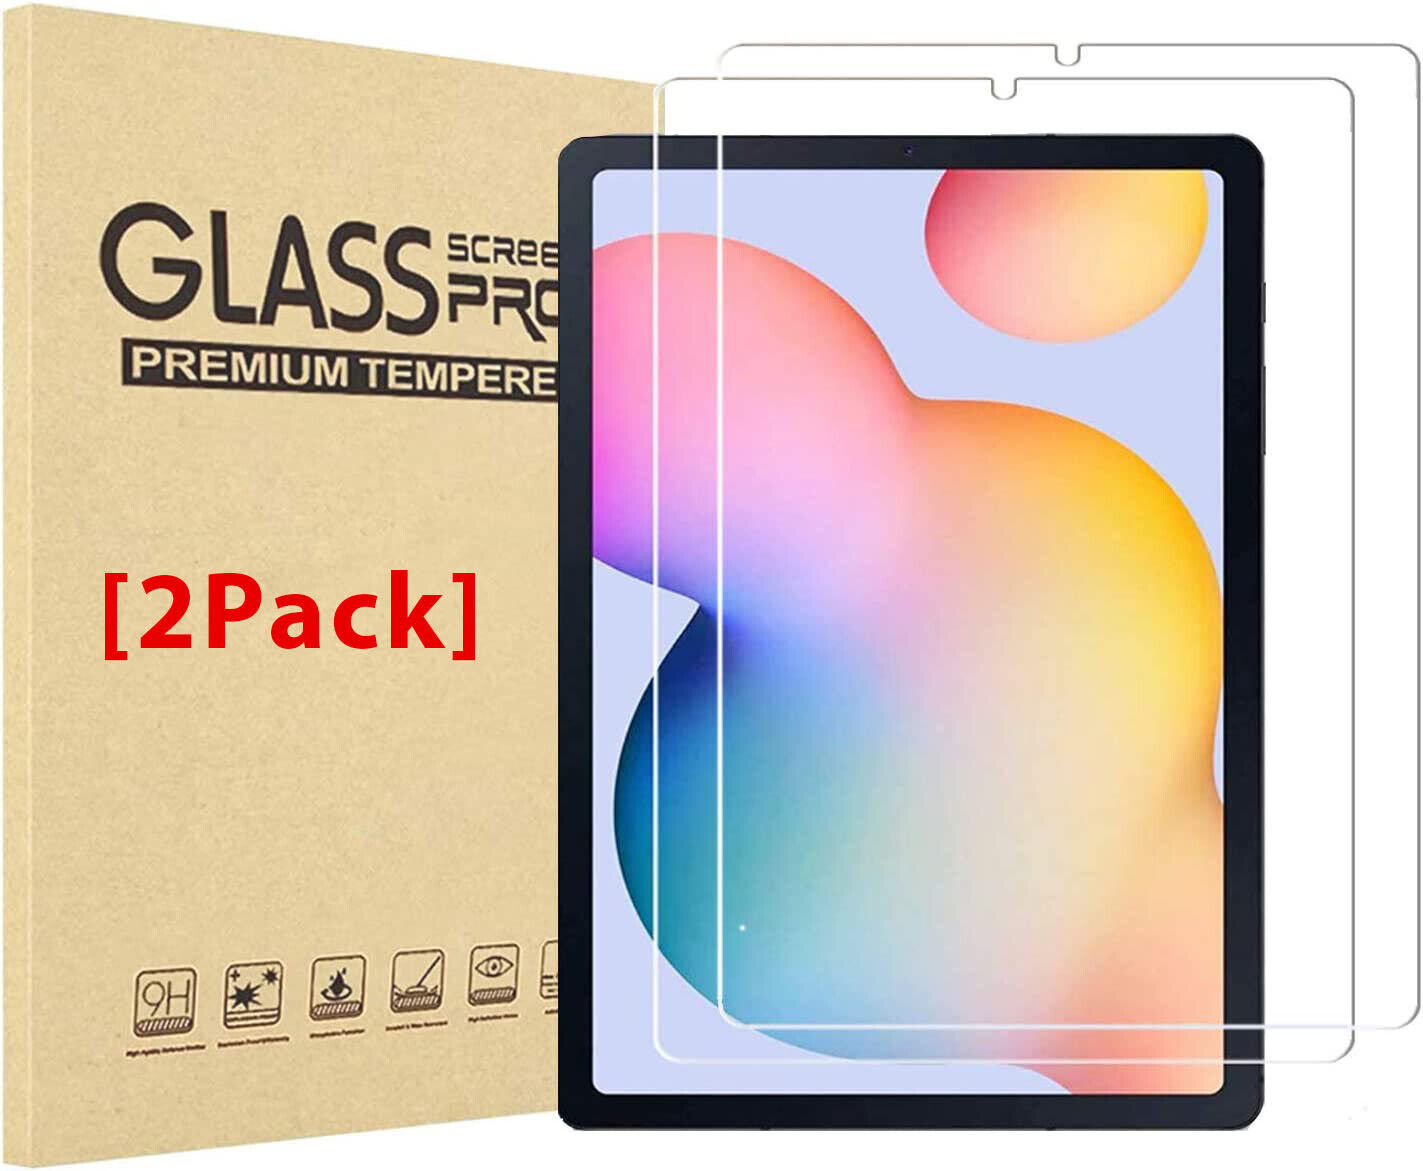 2Pack Tempered Glass Screen Protector For Samsung Galaxy Tab S6 Lite 10.4\